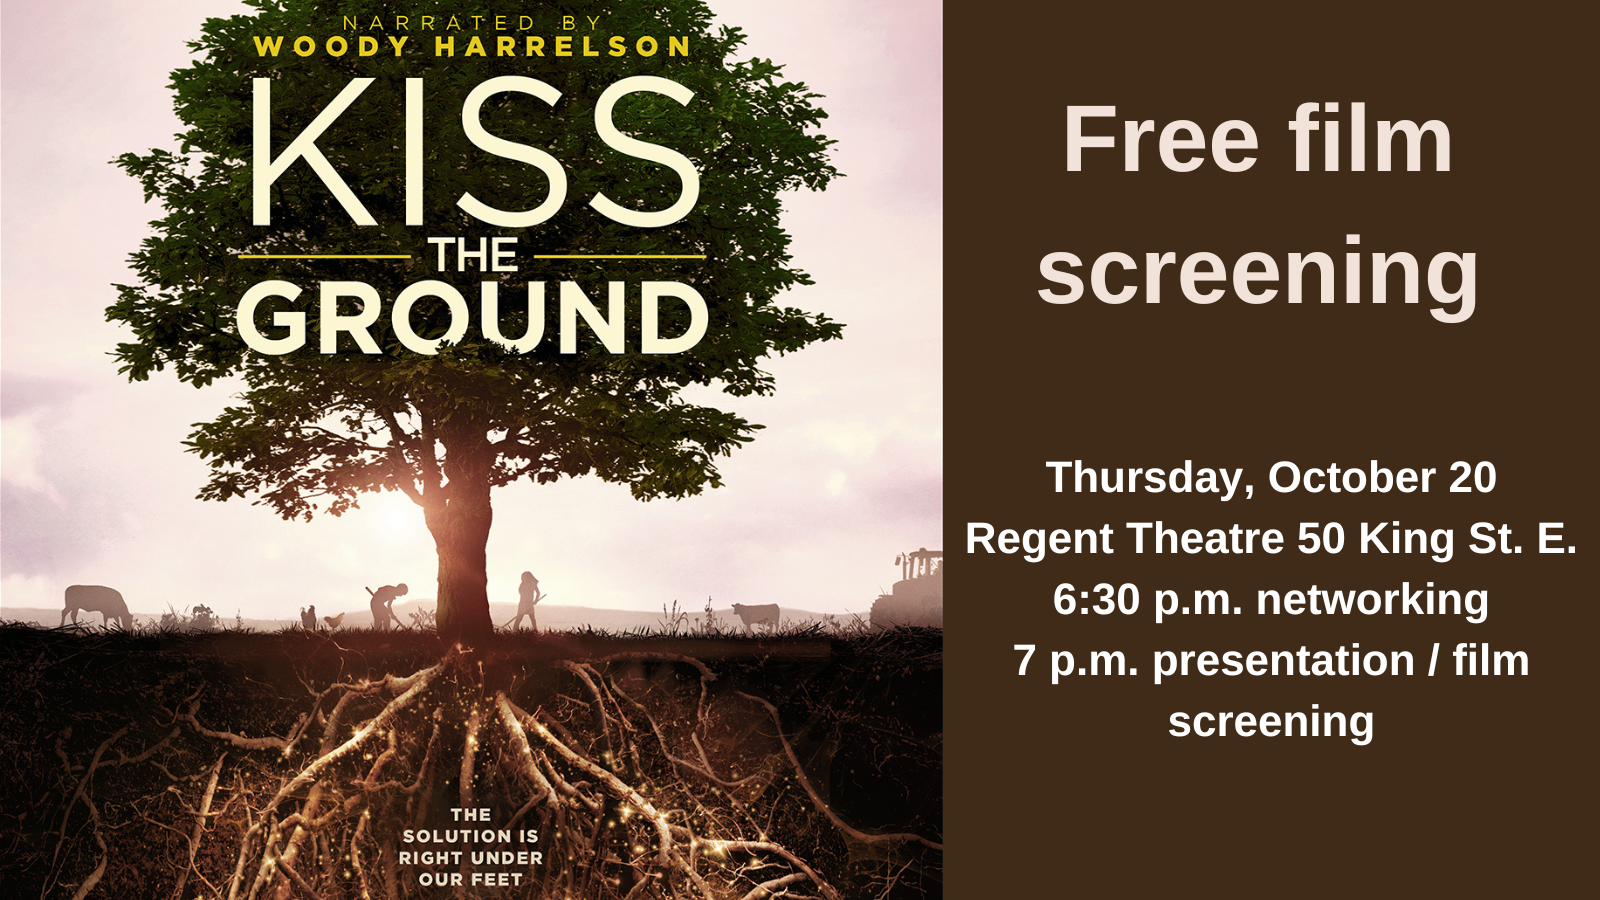 Free screening of “Kiss the Ground” on Oct. 20 at the Regent Theatre